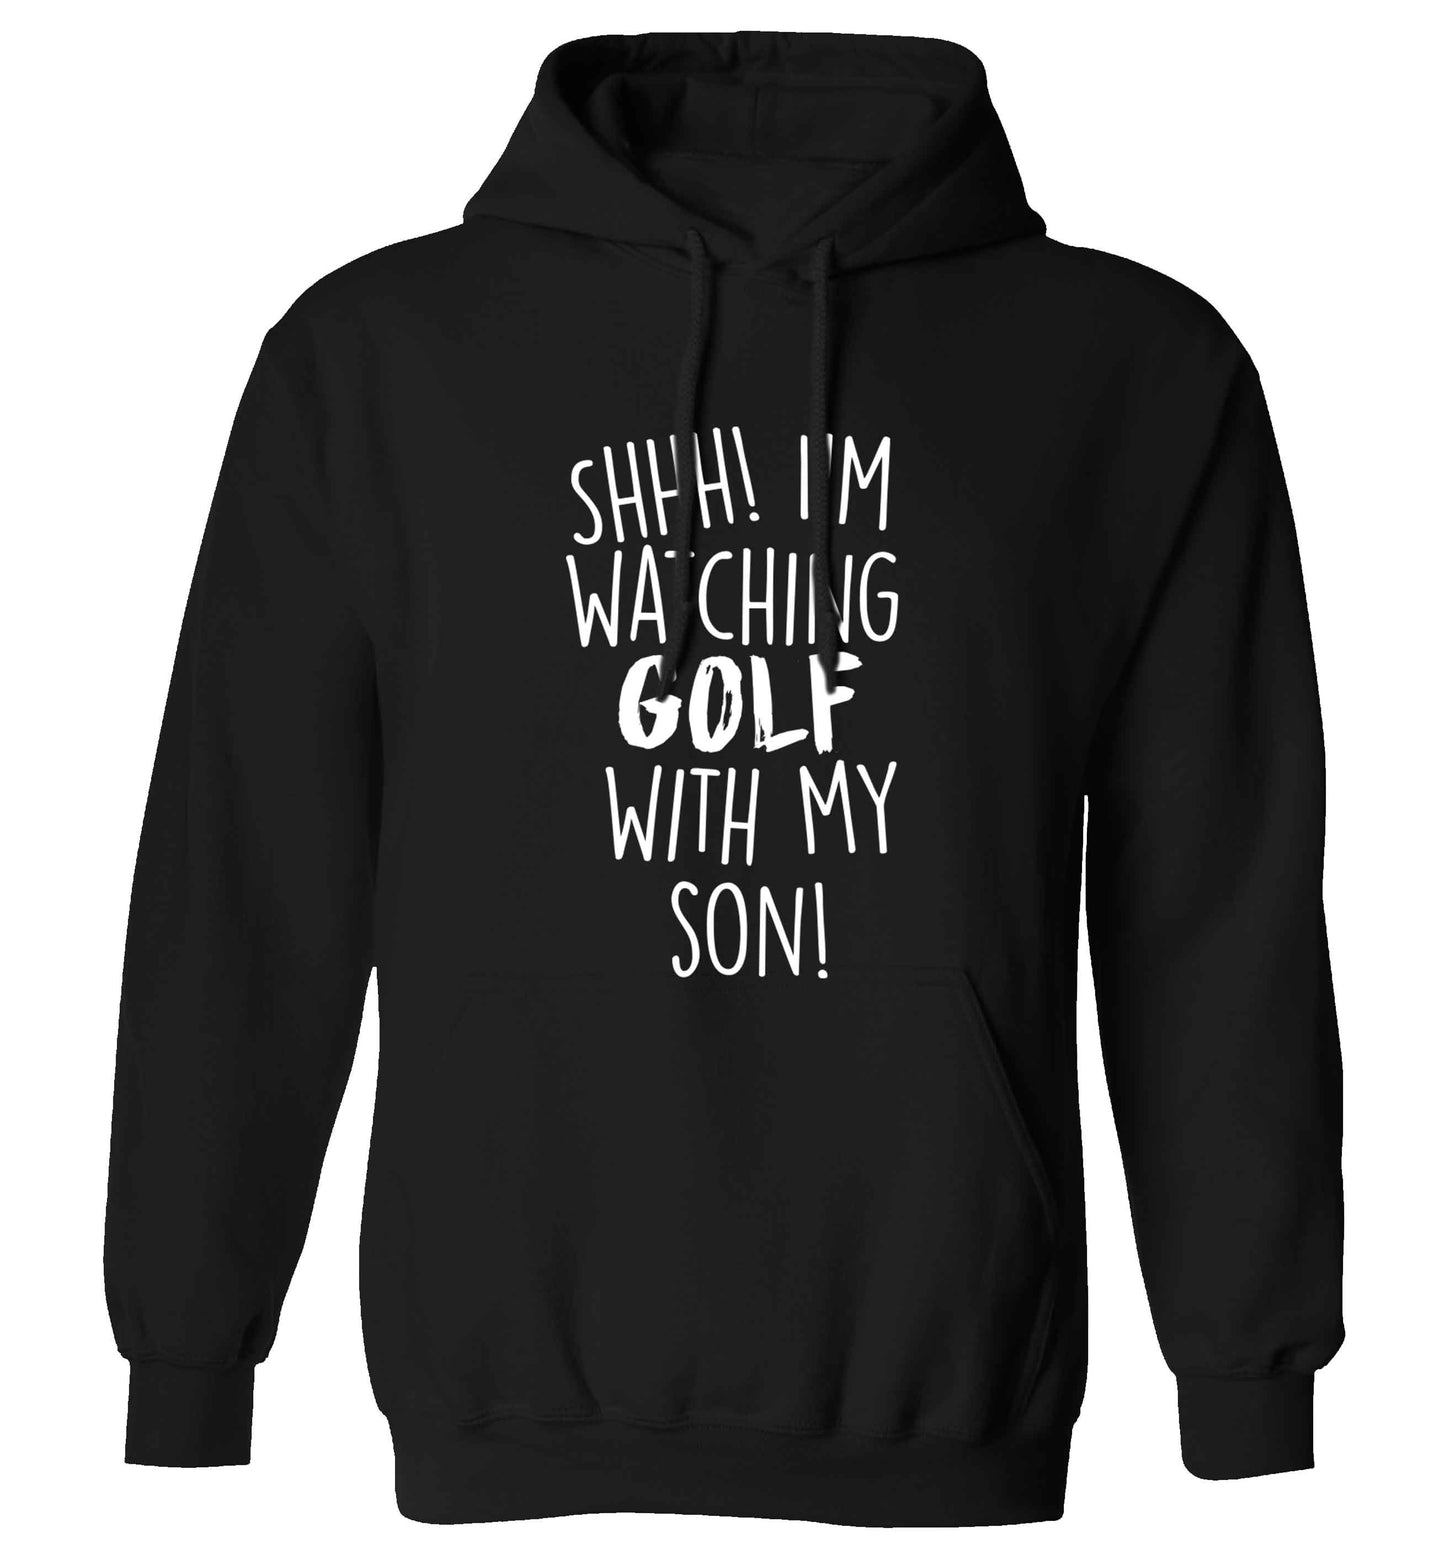 Shh I'm watching golf with my son adults unisex black hoodie 2XL